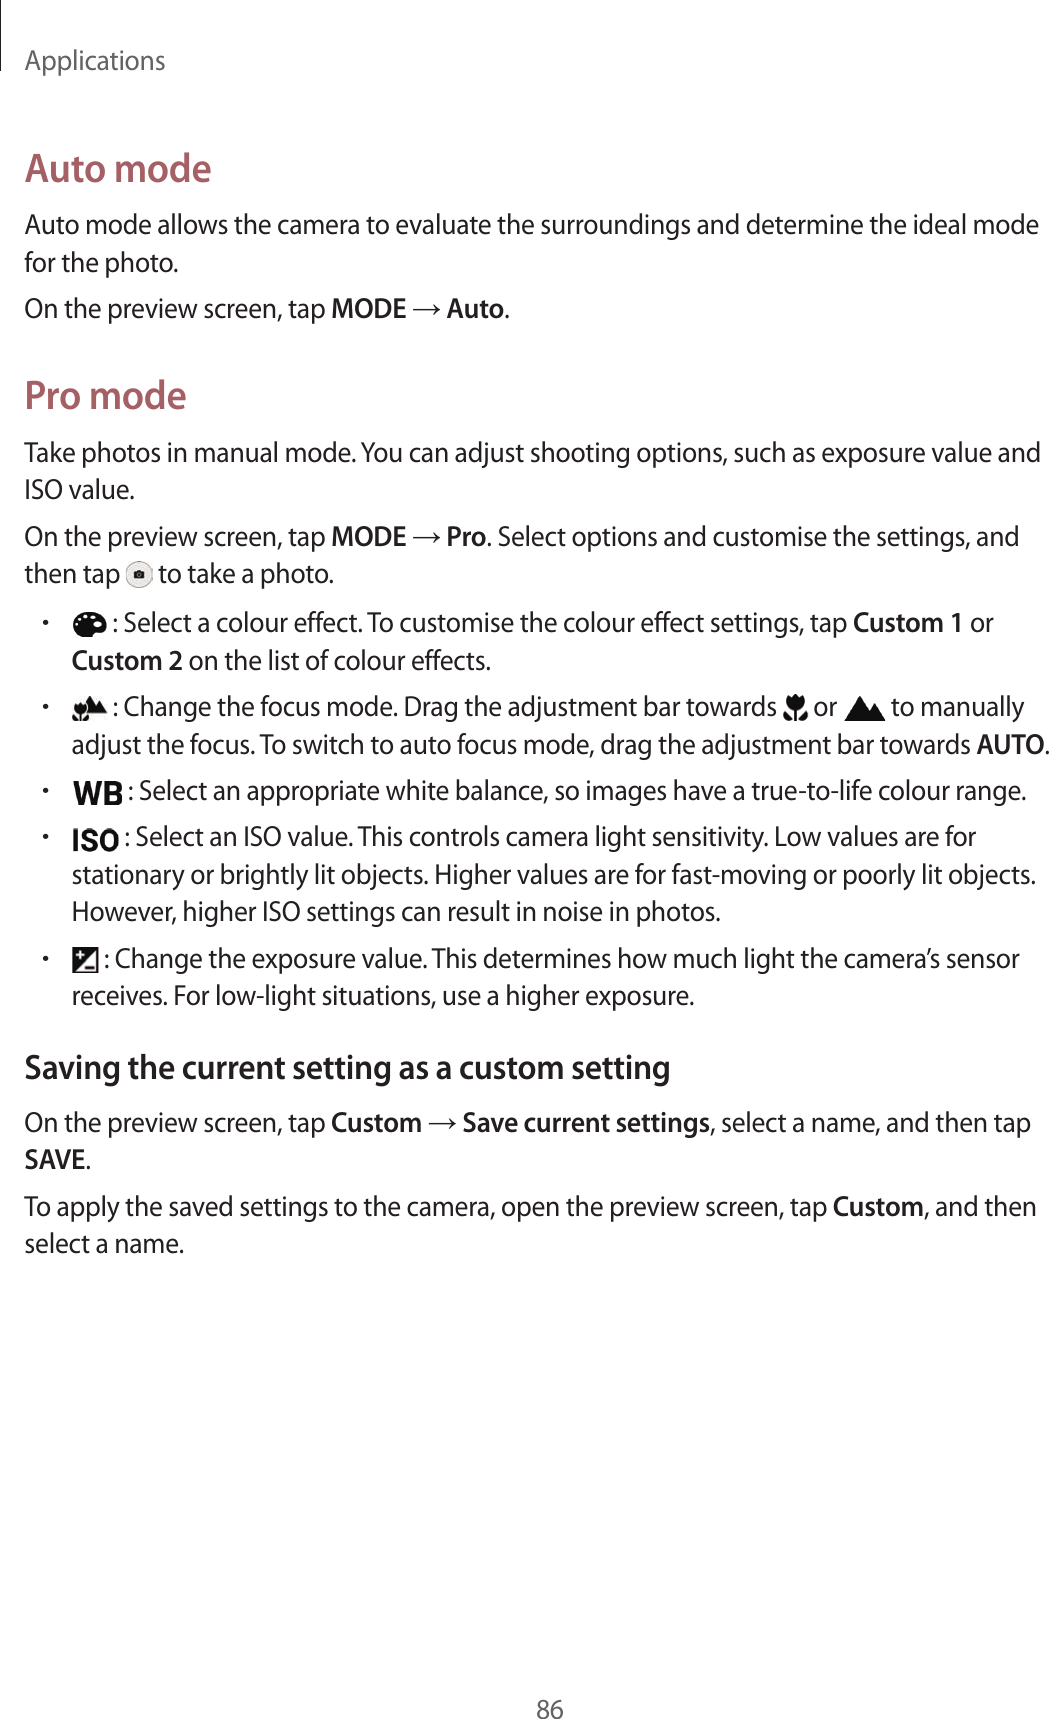 Applications86A uto modeAut o mode allow s the camera t o evalua te the surr oundings and det ermine the ideal mode for the phot o.On the preview scr een, tap MODE  Auto.Pr o modeTake photos in manual mode. You can adjust shooting options, such as exposure v alue and ISO value.On the preview scr een, tap MODE  Pro. Select options and customise the settings , and then tap   to take a photo .• : Select a colour eff ect. To customise the colour effect settings, tap Cust om 1 or Cust om 2 on the list of colour eff ects.• : Change the focus mode . Dr ag the adjustment bar t ow ar ds   or   to manually adjust the focus . To switch to auto focus mode , dr ag the adjustment bar t o war ds AUTO.• : Select an appropriat e white balanc e , so images ha v e a true-to-life c olour range .• : Select an ISO value . T his con tr ols camera ligh t sensitivity. Lo w values ar e for stationary or brightly lit objects. Higher values are f or fast-mo ving or poorly lit objects. Howev er, higher ISO settings can result in noise in photos .• : Change the exposure value. This determines how much light the camera’s sensor receiv es . For low -light situa tions , use a higher exposur e .Saving the curren t setting as a custom settingOn the preview scr een, tap Custom  Save curr en t settings, select a name, and then tap SAVE.To apply the sav ed settings to the camer a, open the pr eview scr een, tap Custom, and then select a name.